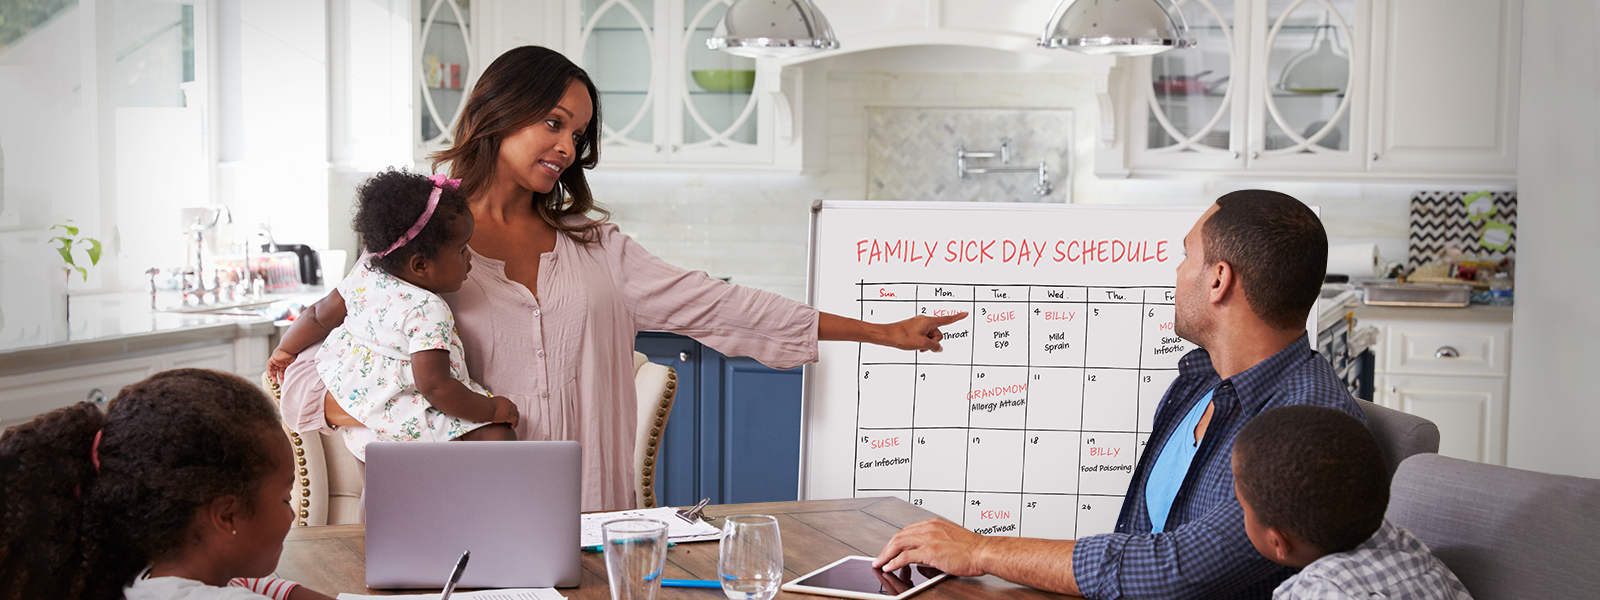 Family at table reviewing family sick schedule